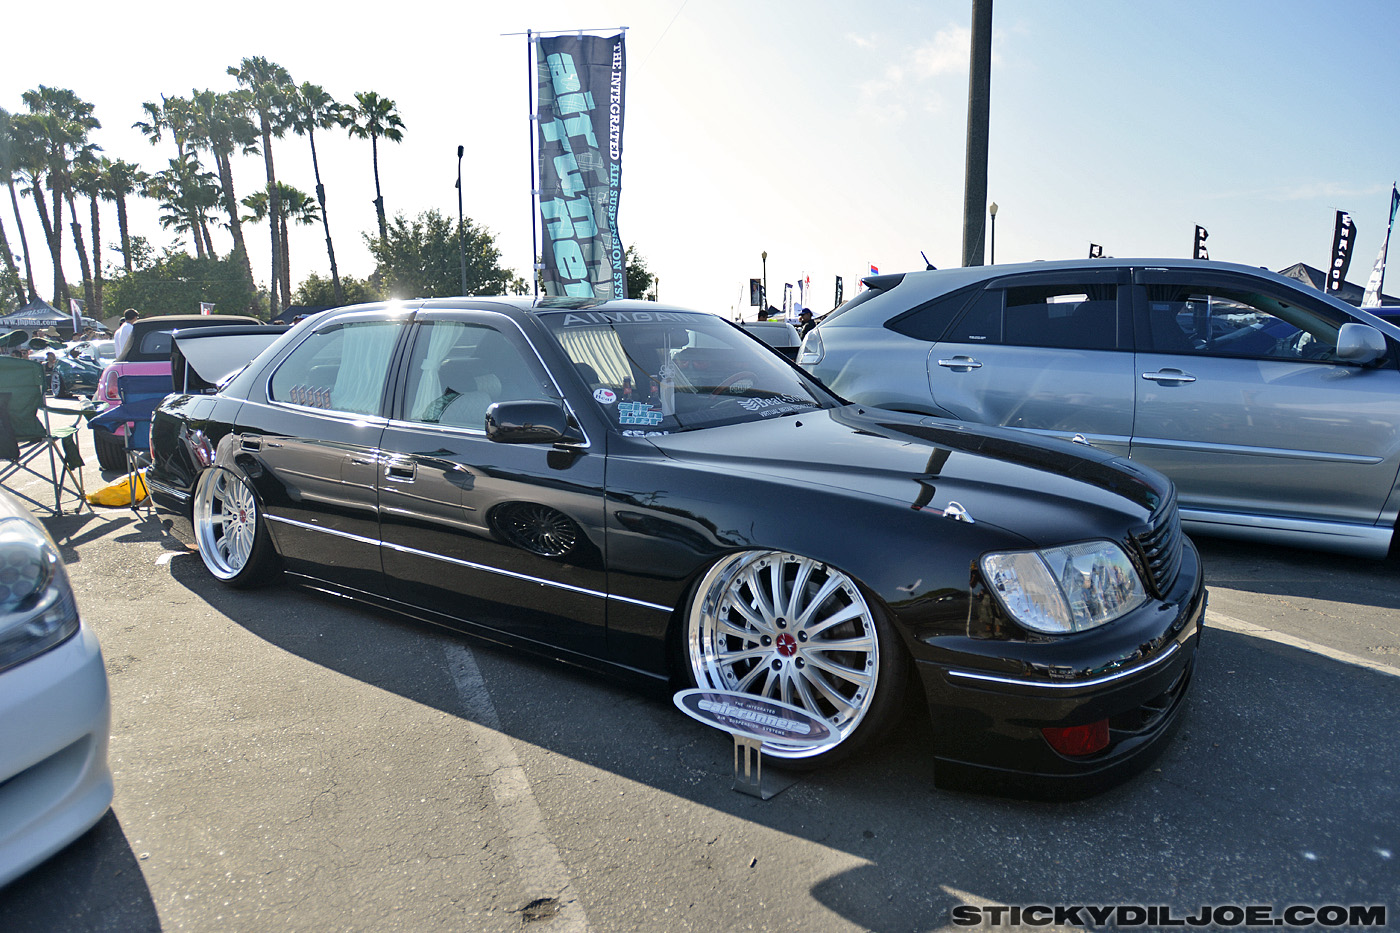 Wekfest LA 2012 Coverage…Part 4: The Late Afternoon, from ...